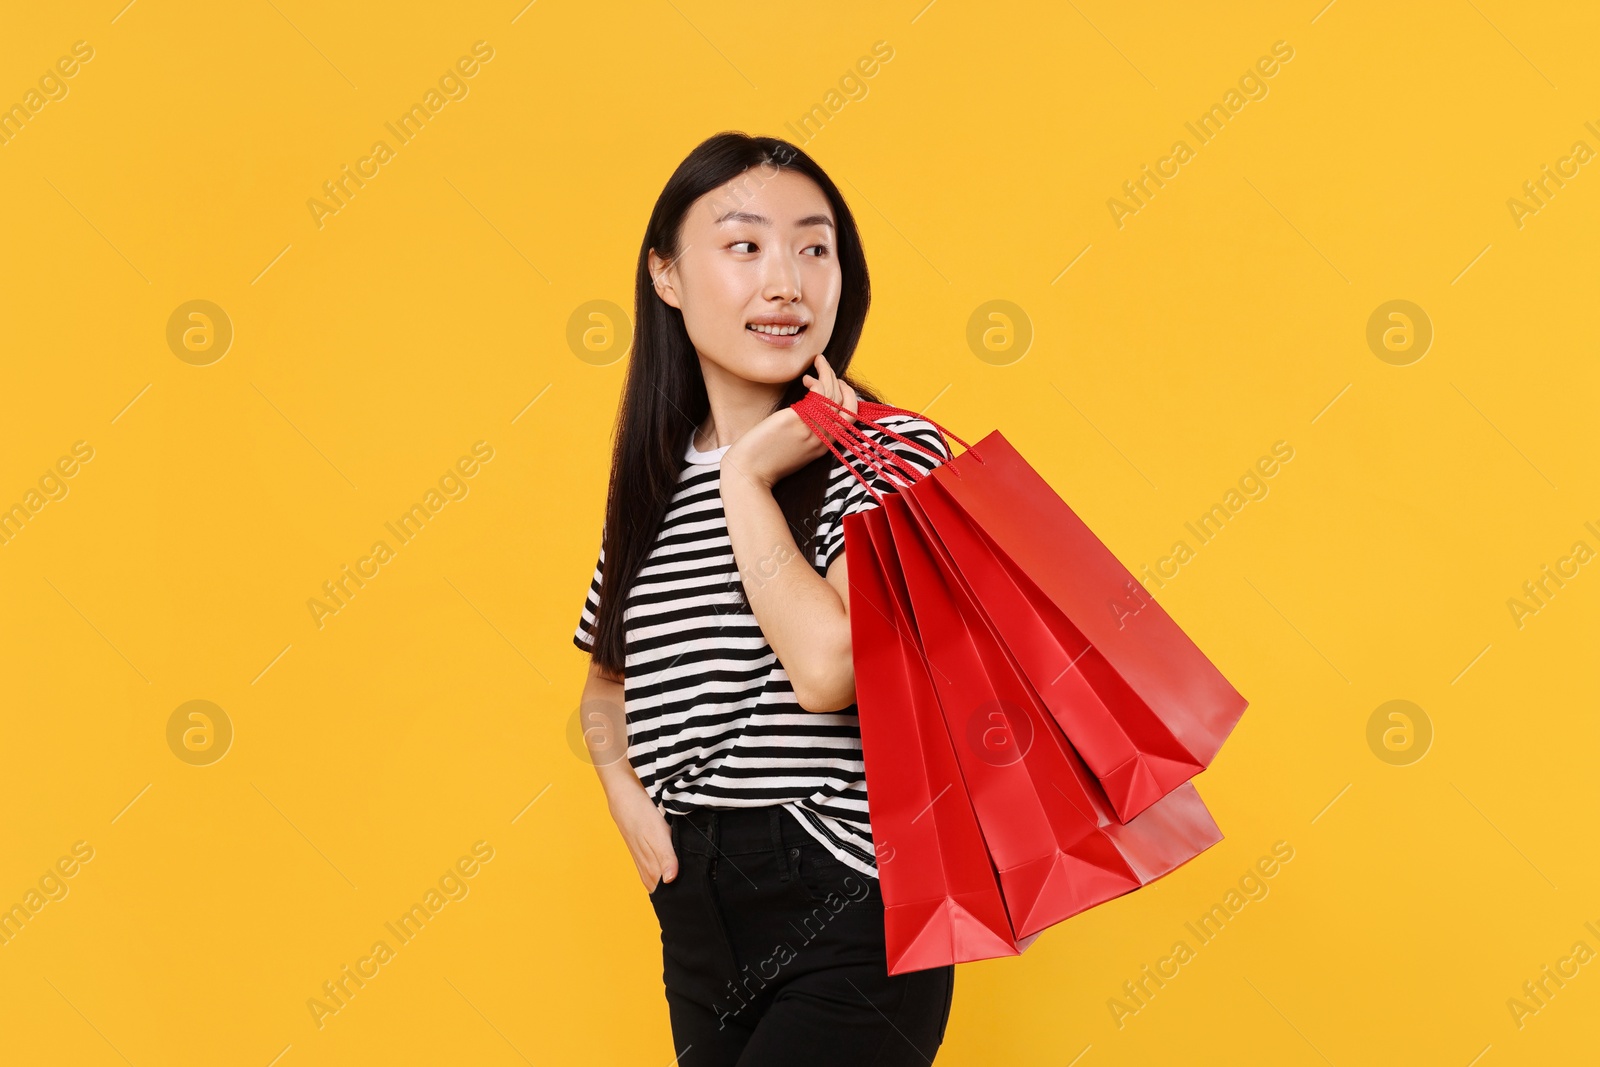 Photo of Smiling woman with shopping bags on yellow background